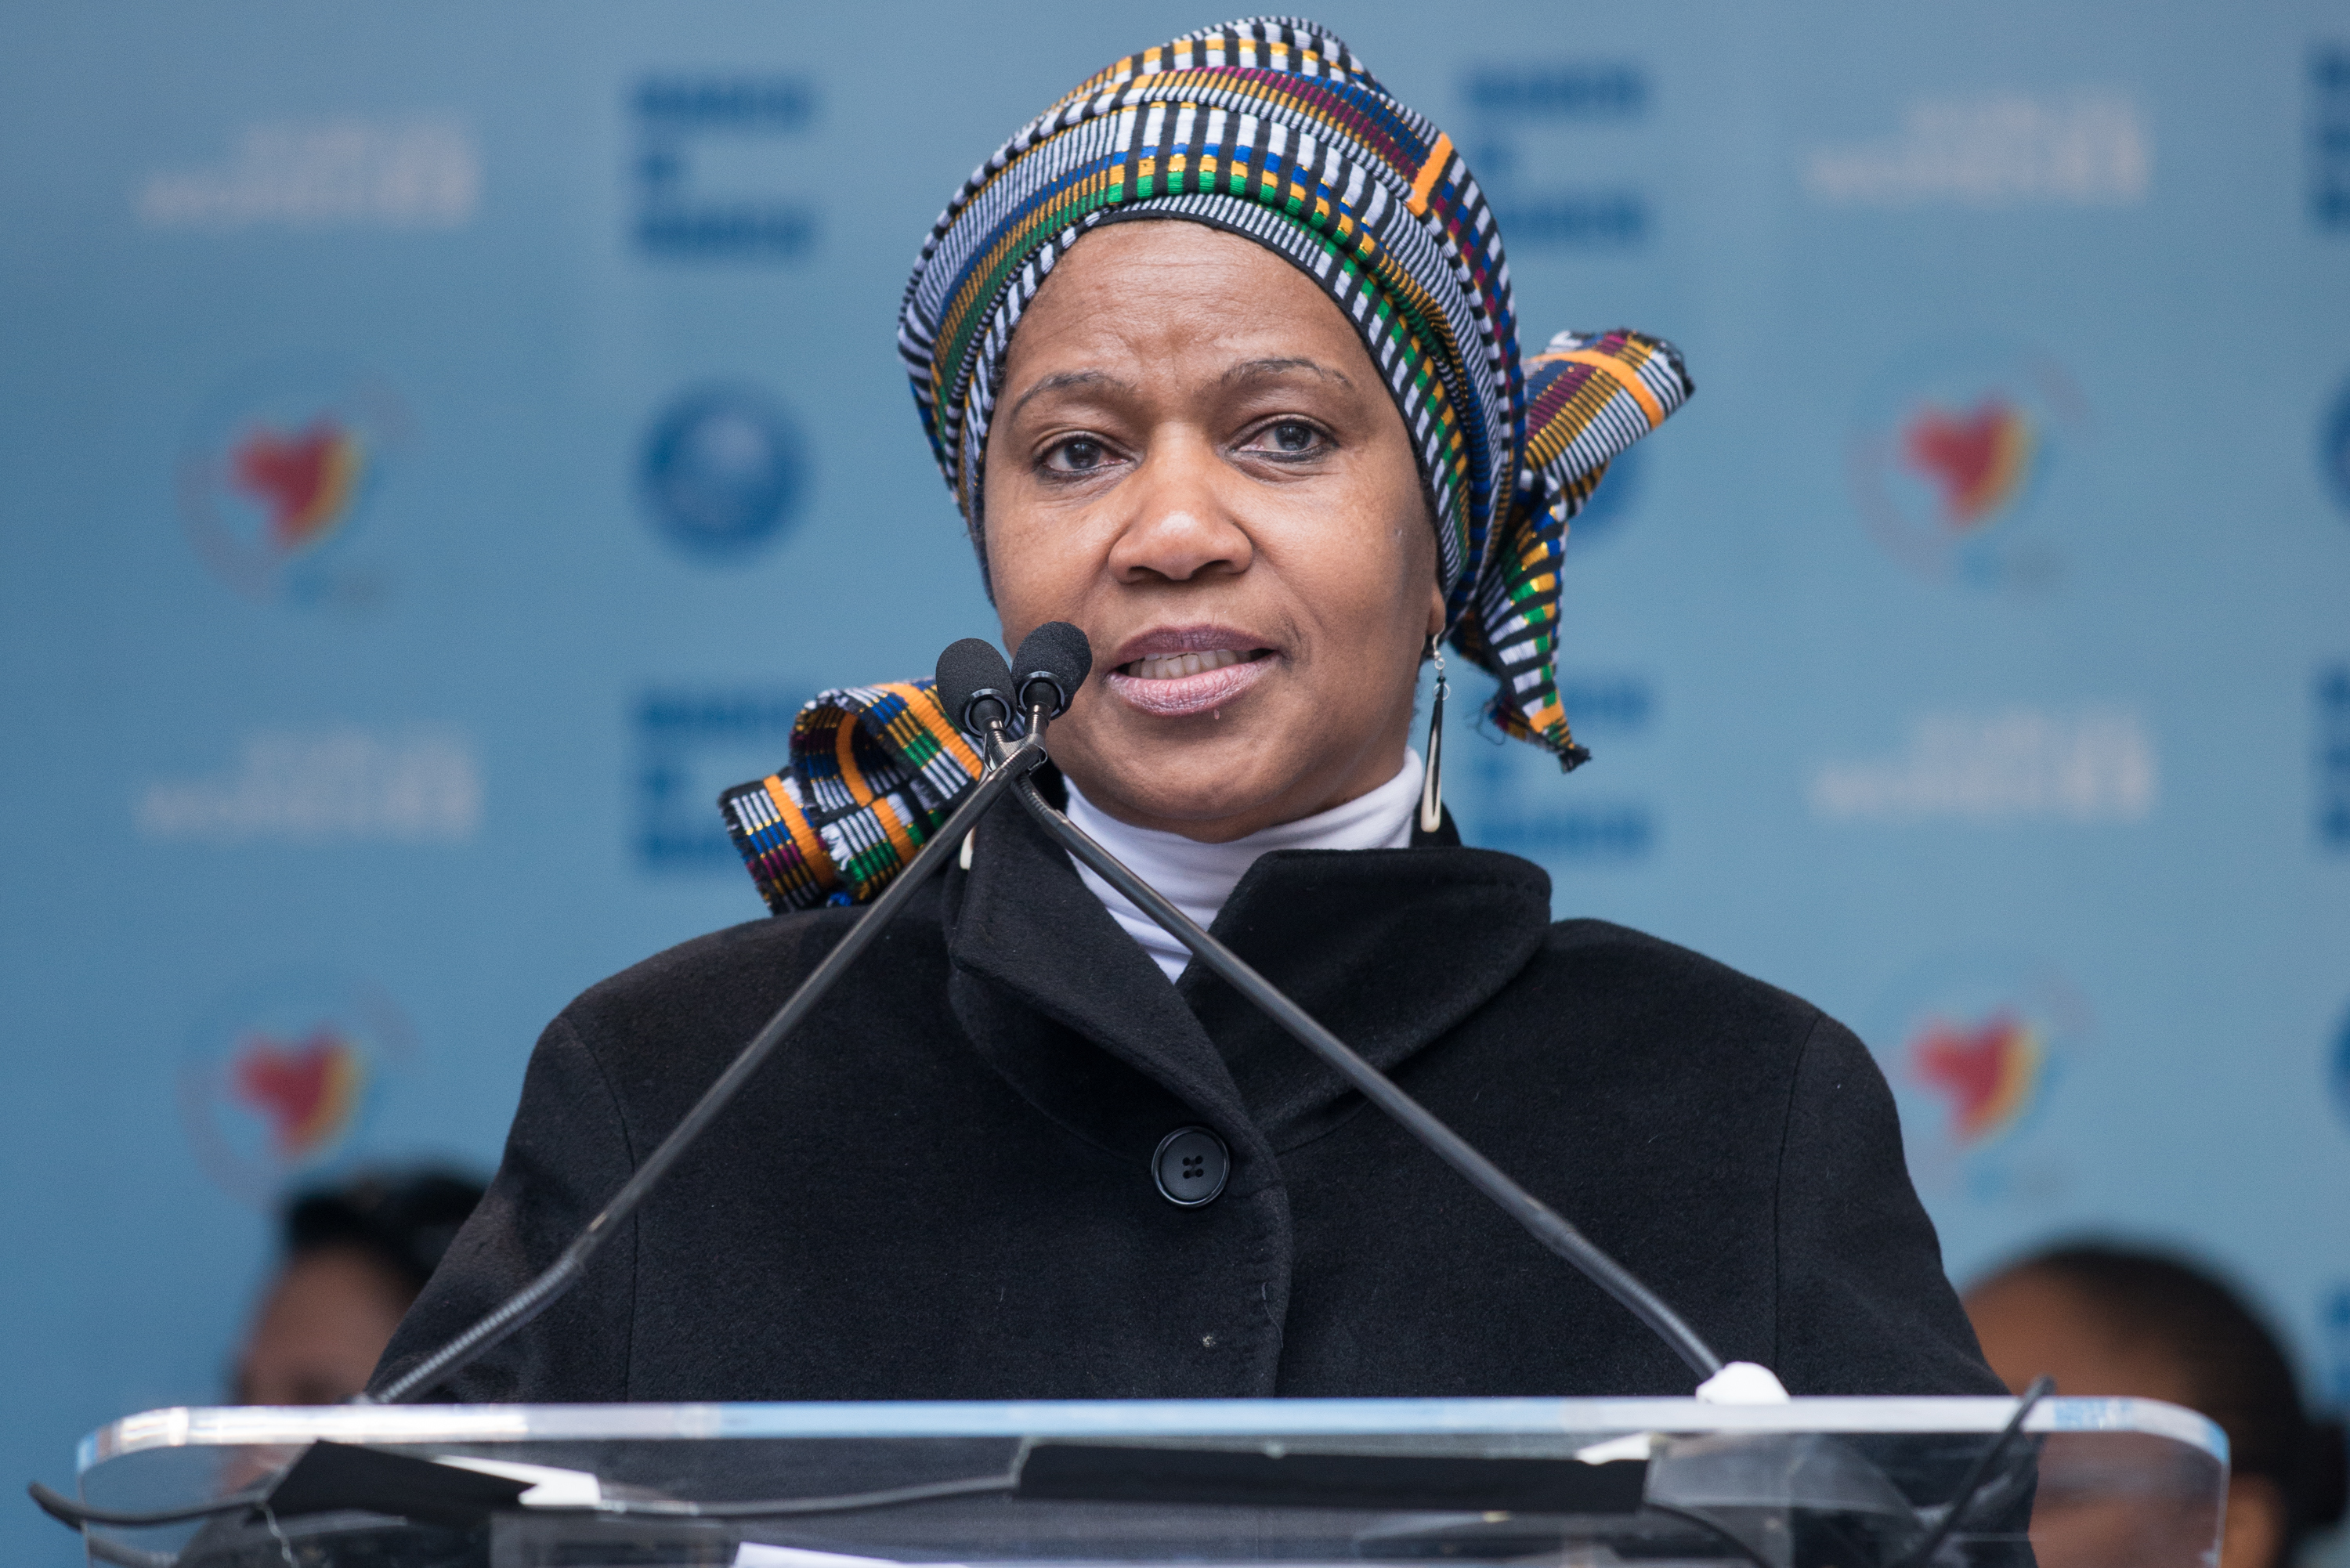 Assistant Secretary General Phumzile Mlambo-Ngcuka in New York City, on March 8, 2015. (Mark Sagliocco—Getty Images)